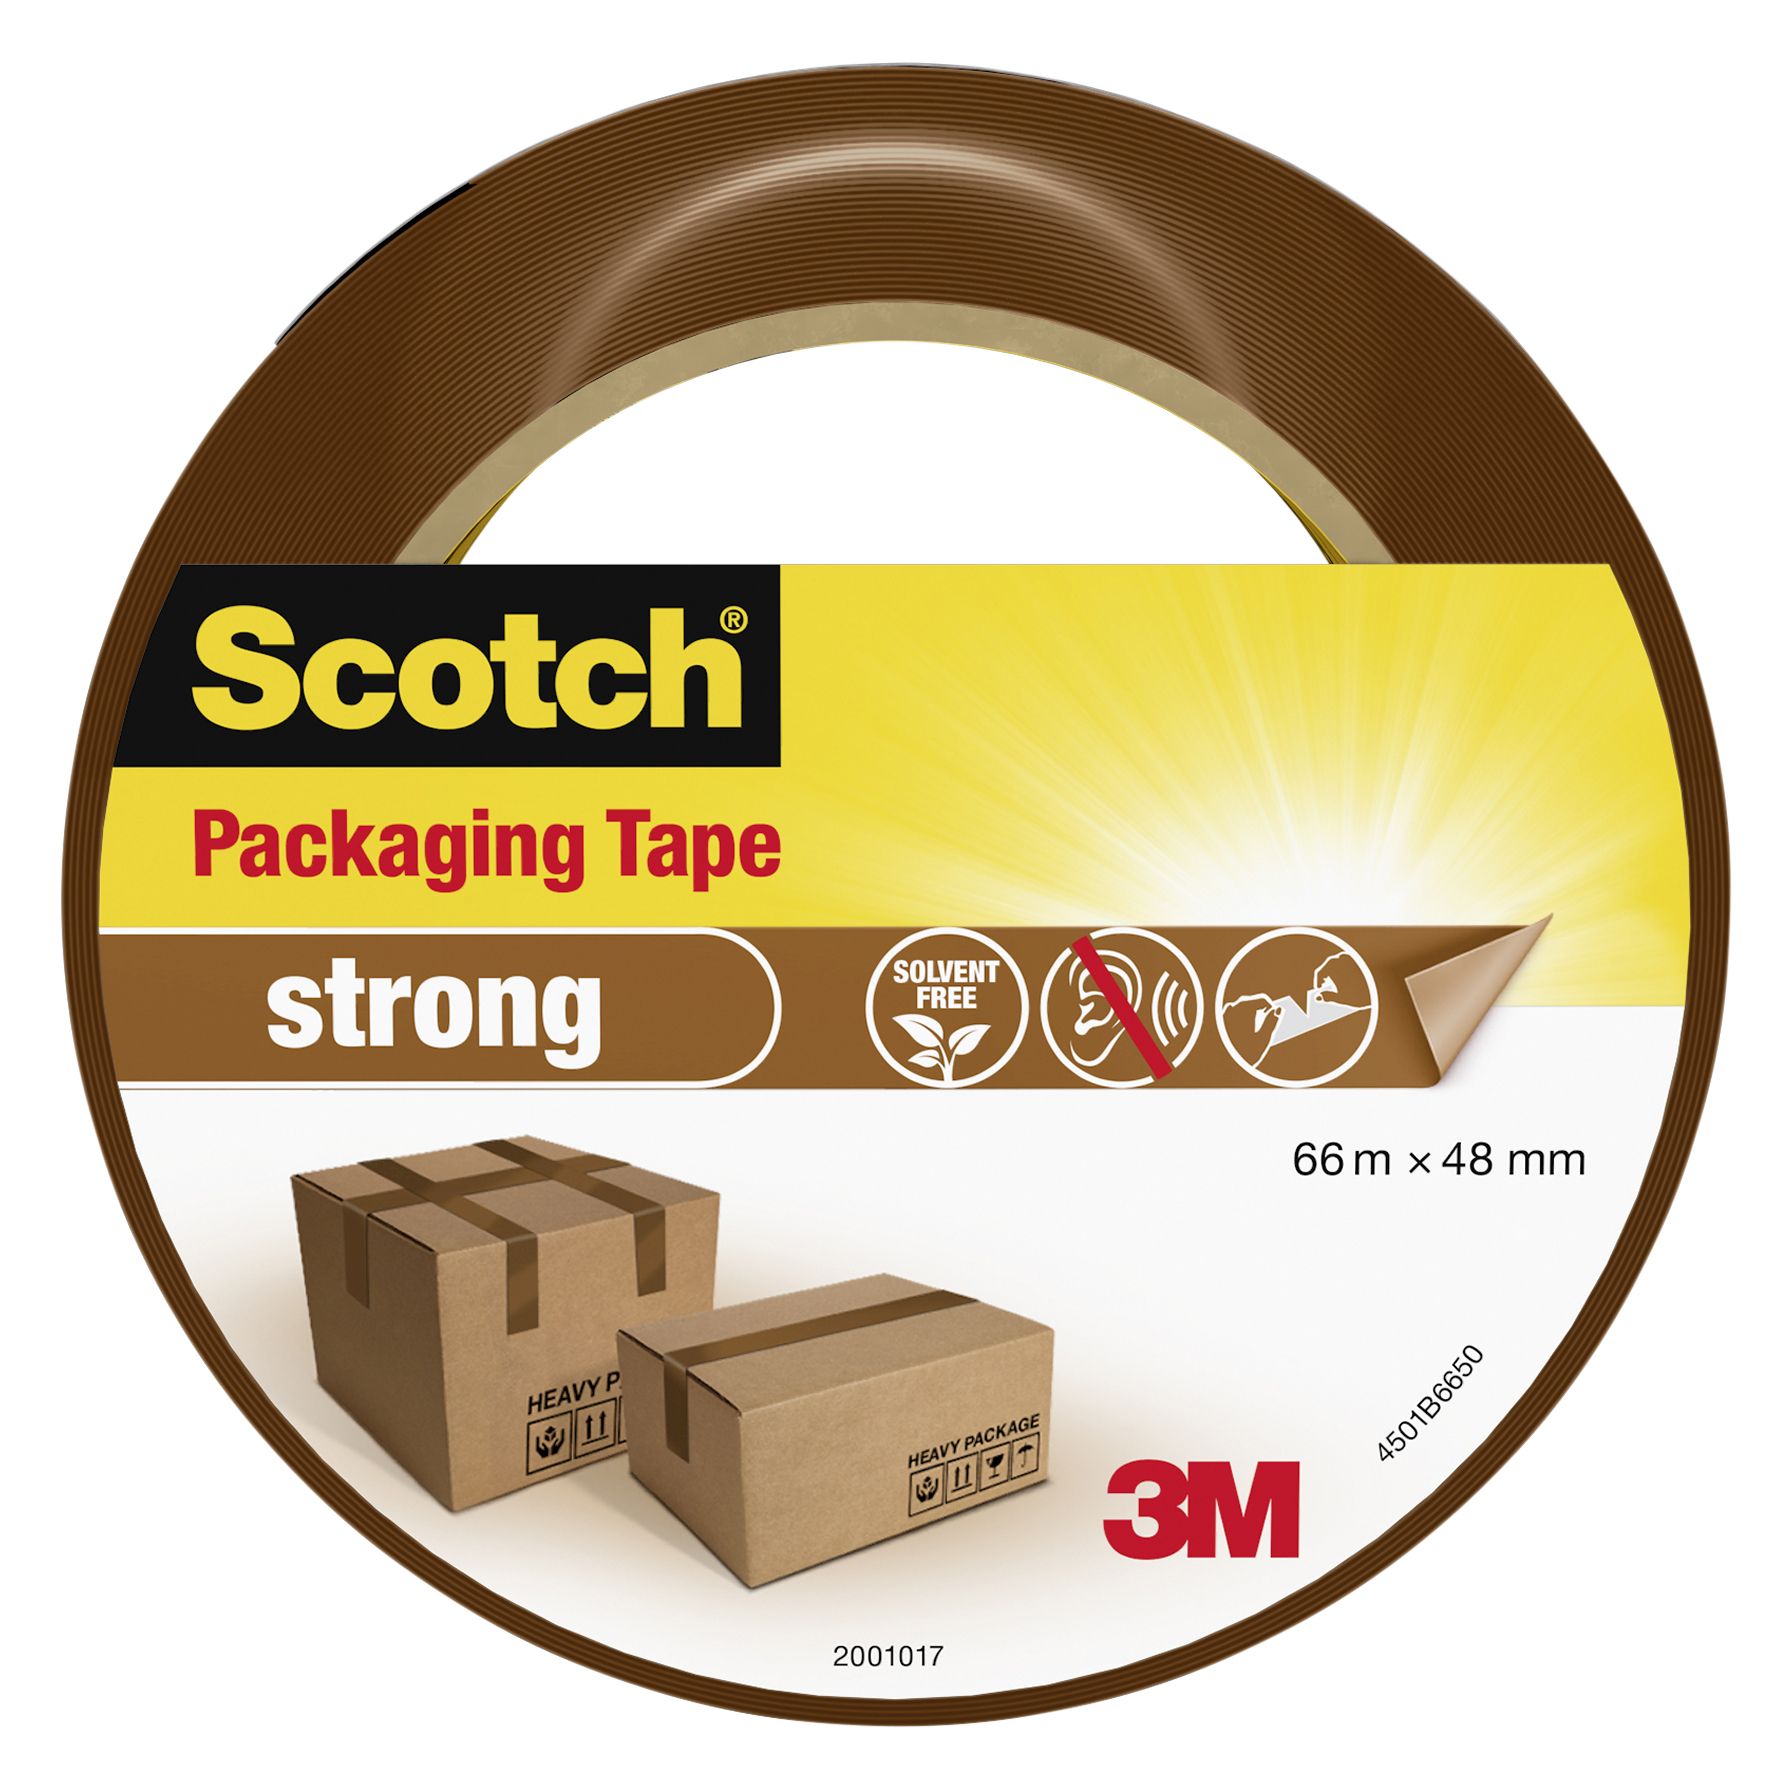 Scotch 51115687563 355 Industrial-Grade Packing Tape, Clear, 48 Mm X 50 M,  High Performance Sealing Tape For Heavy-Duty Commercial Packaging